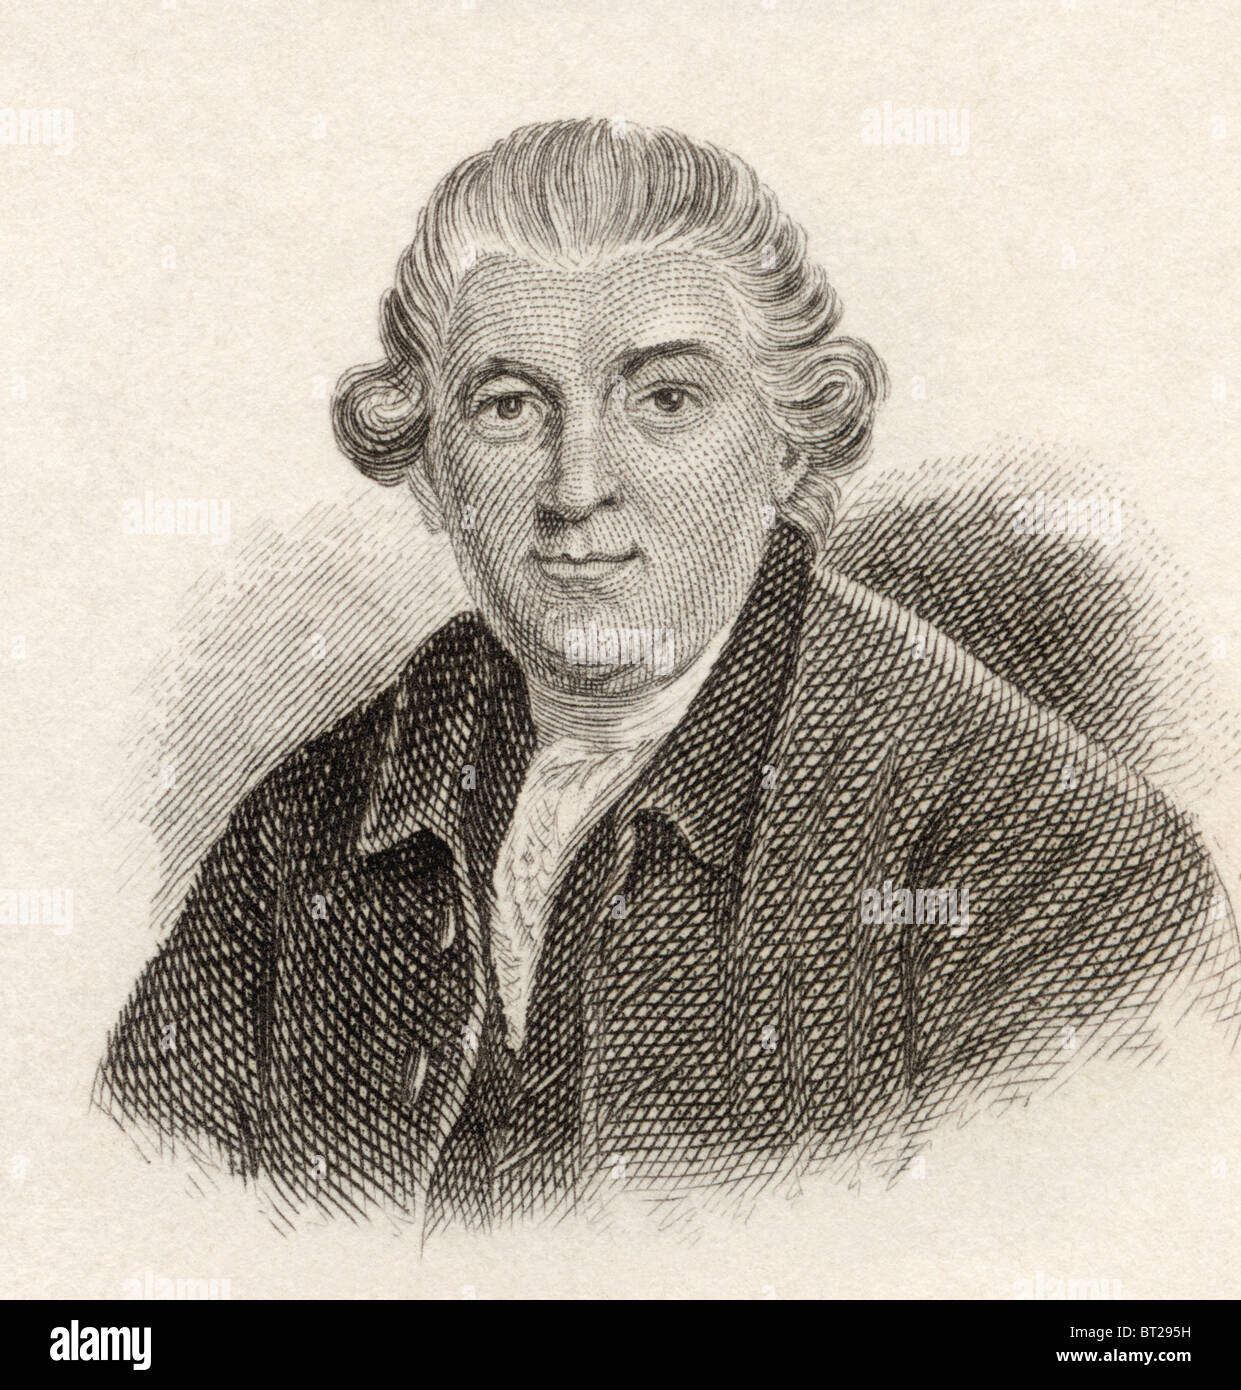 David Garrick, 1717 to 1779. English actor, playwright, theatre manager and producer. Stock Photo